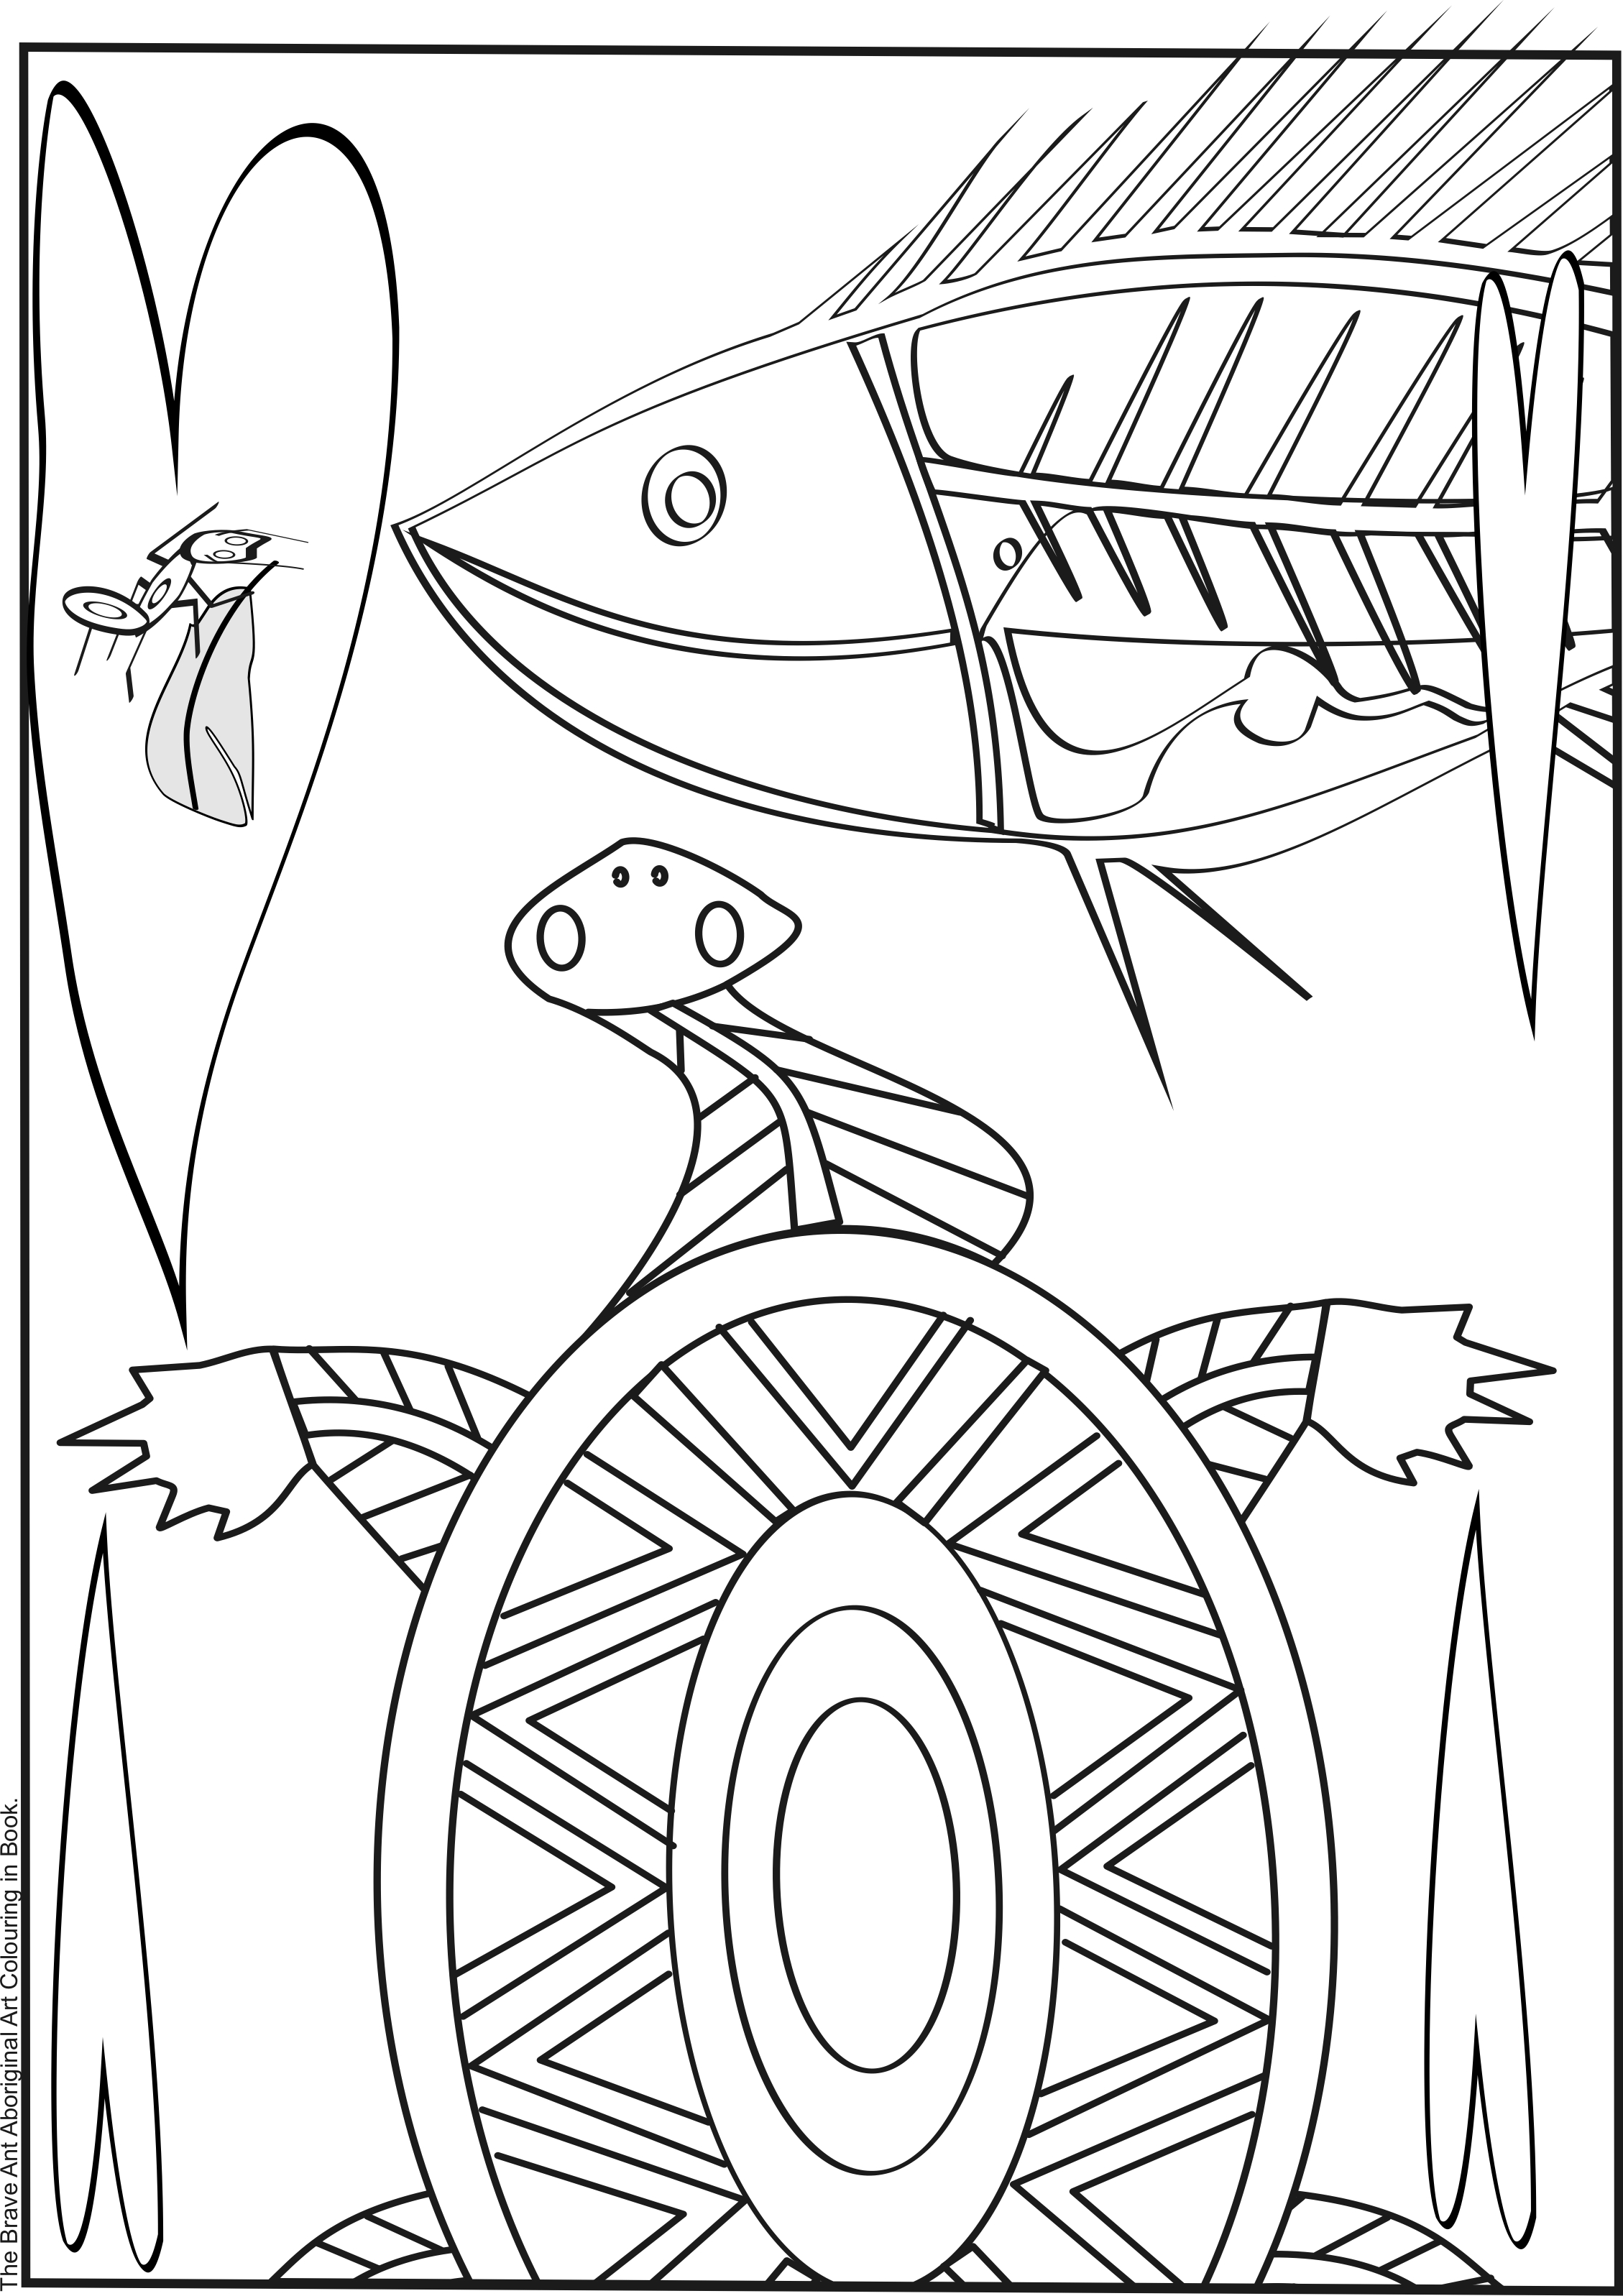 15-free-summer-coloring-pages-for-kids-prudent-penny-pincher-art-kk